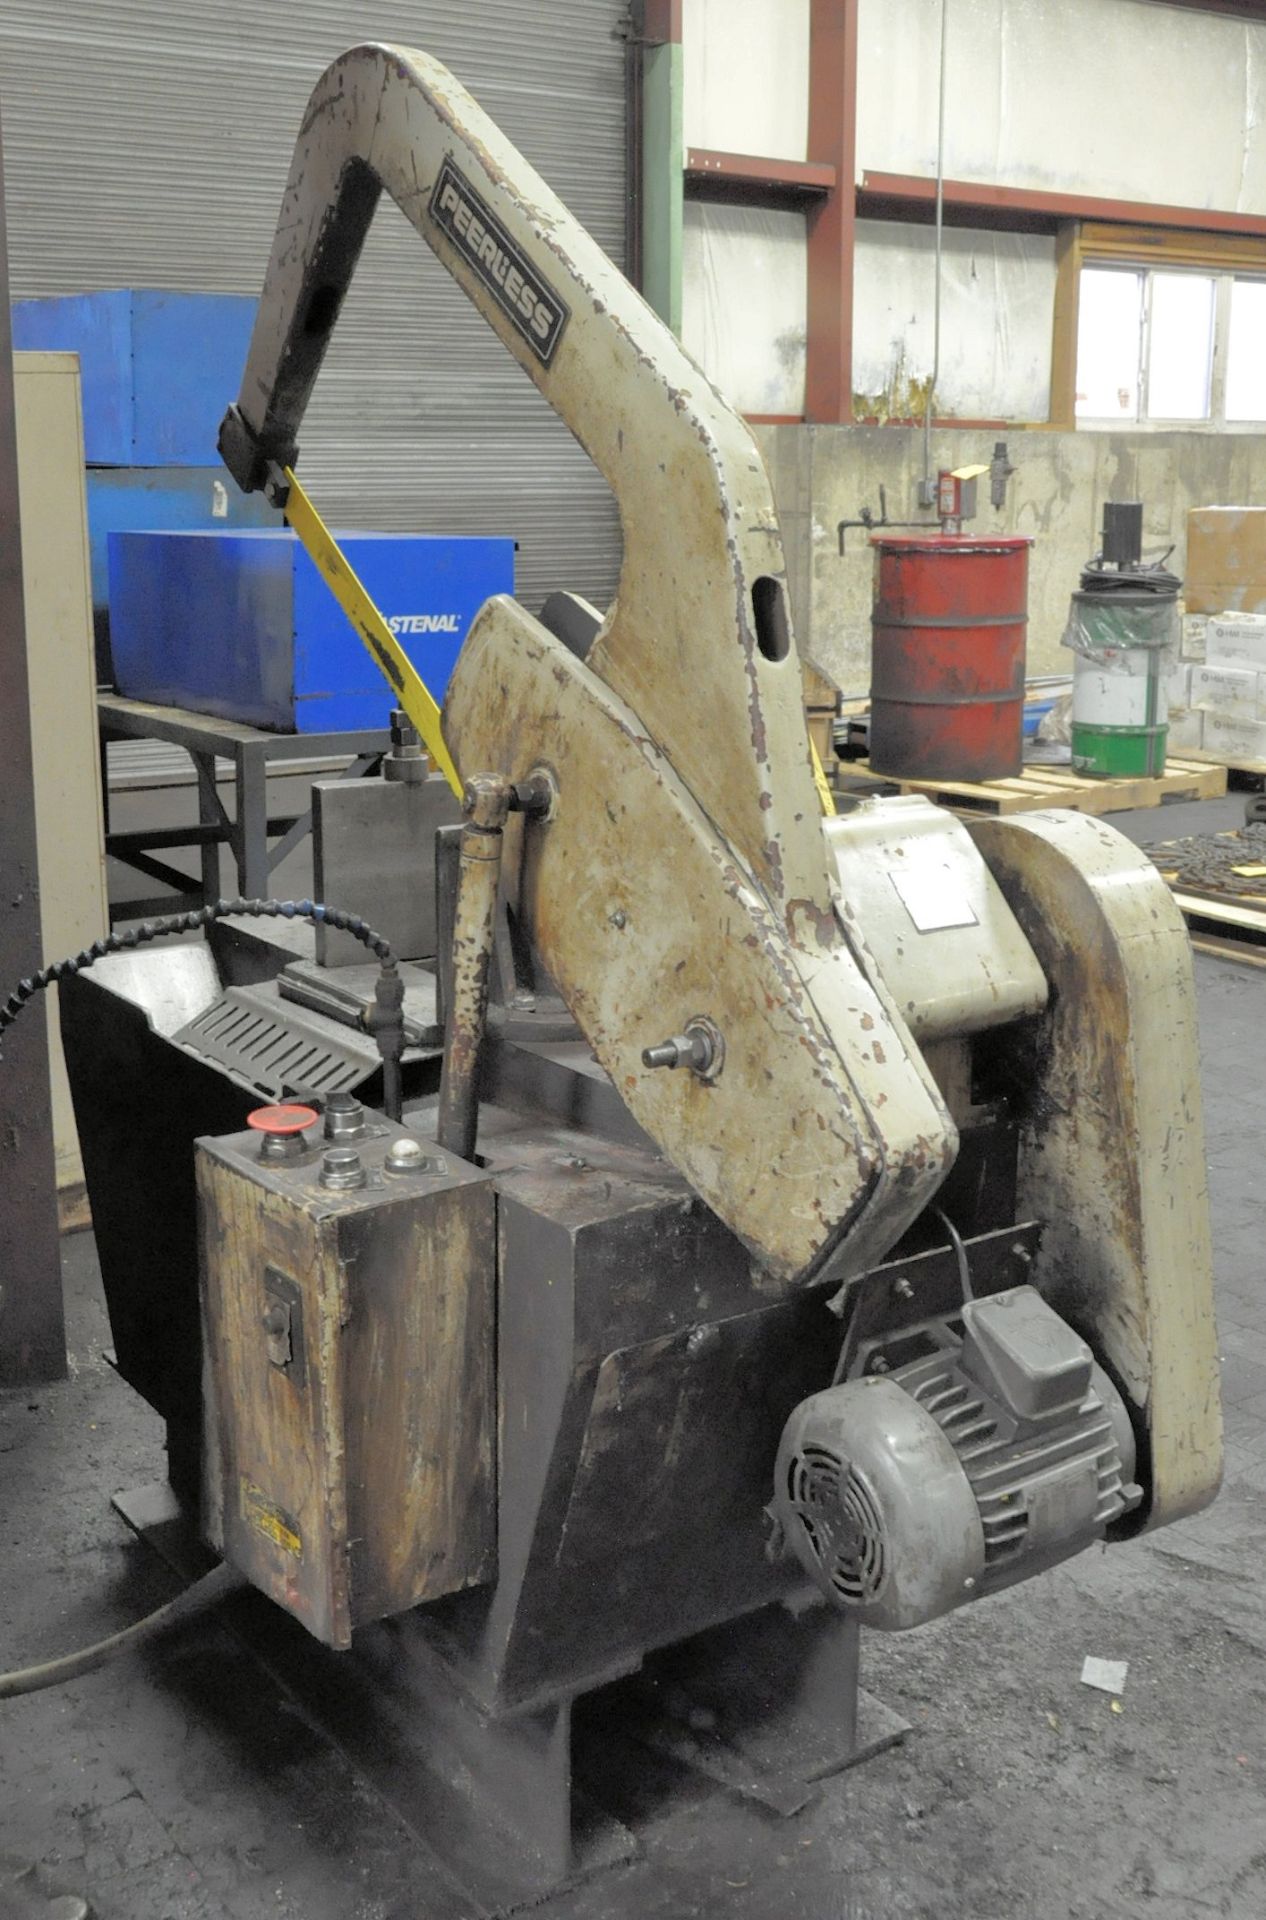 Peerless 20" Steel Cutting Power Hack Saw Machine, s/n Unknown, with Roller Feed Stock Stand - Image 2 of 2